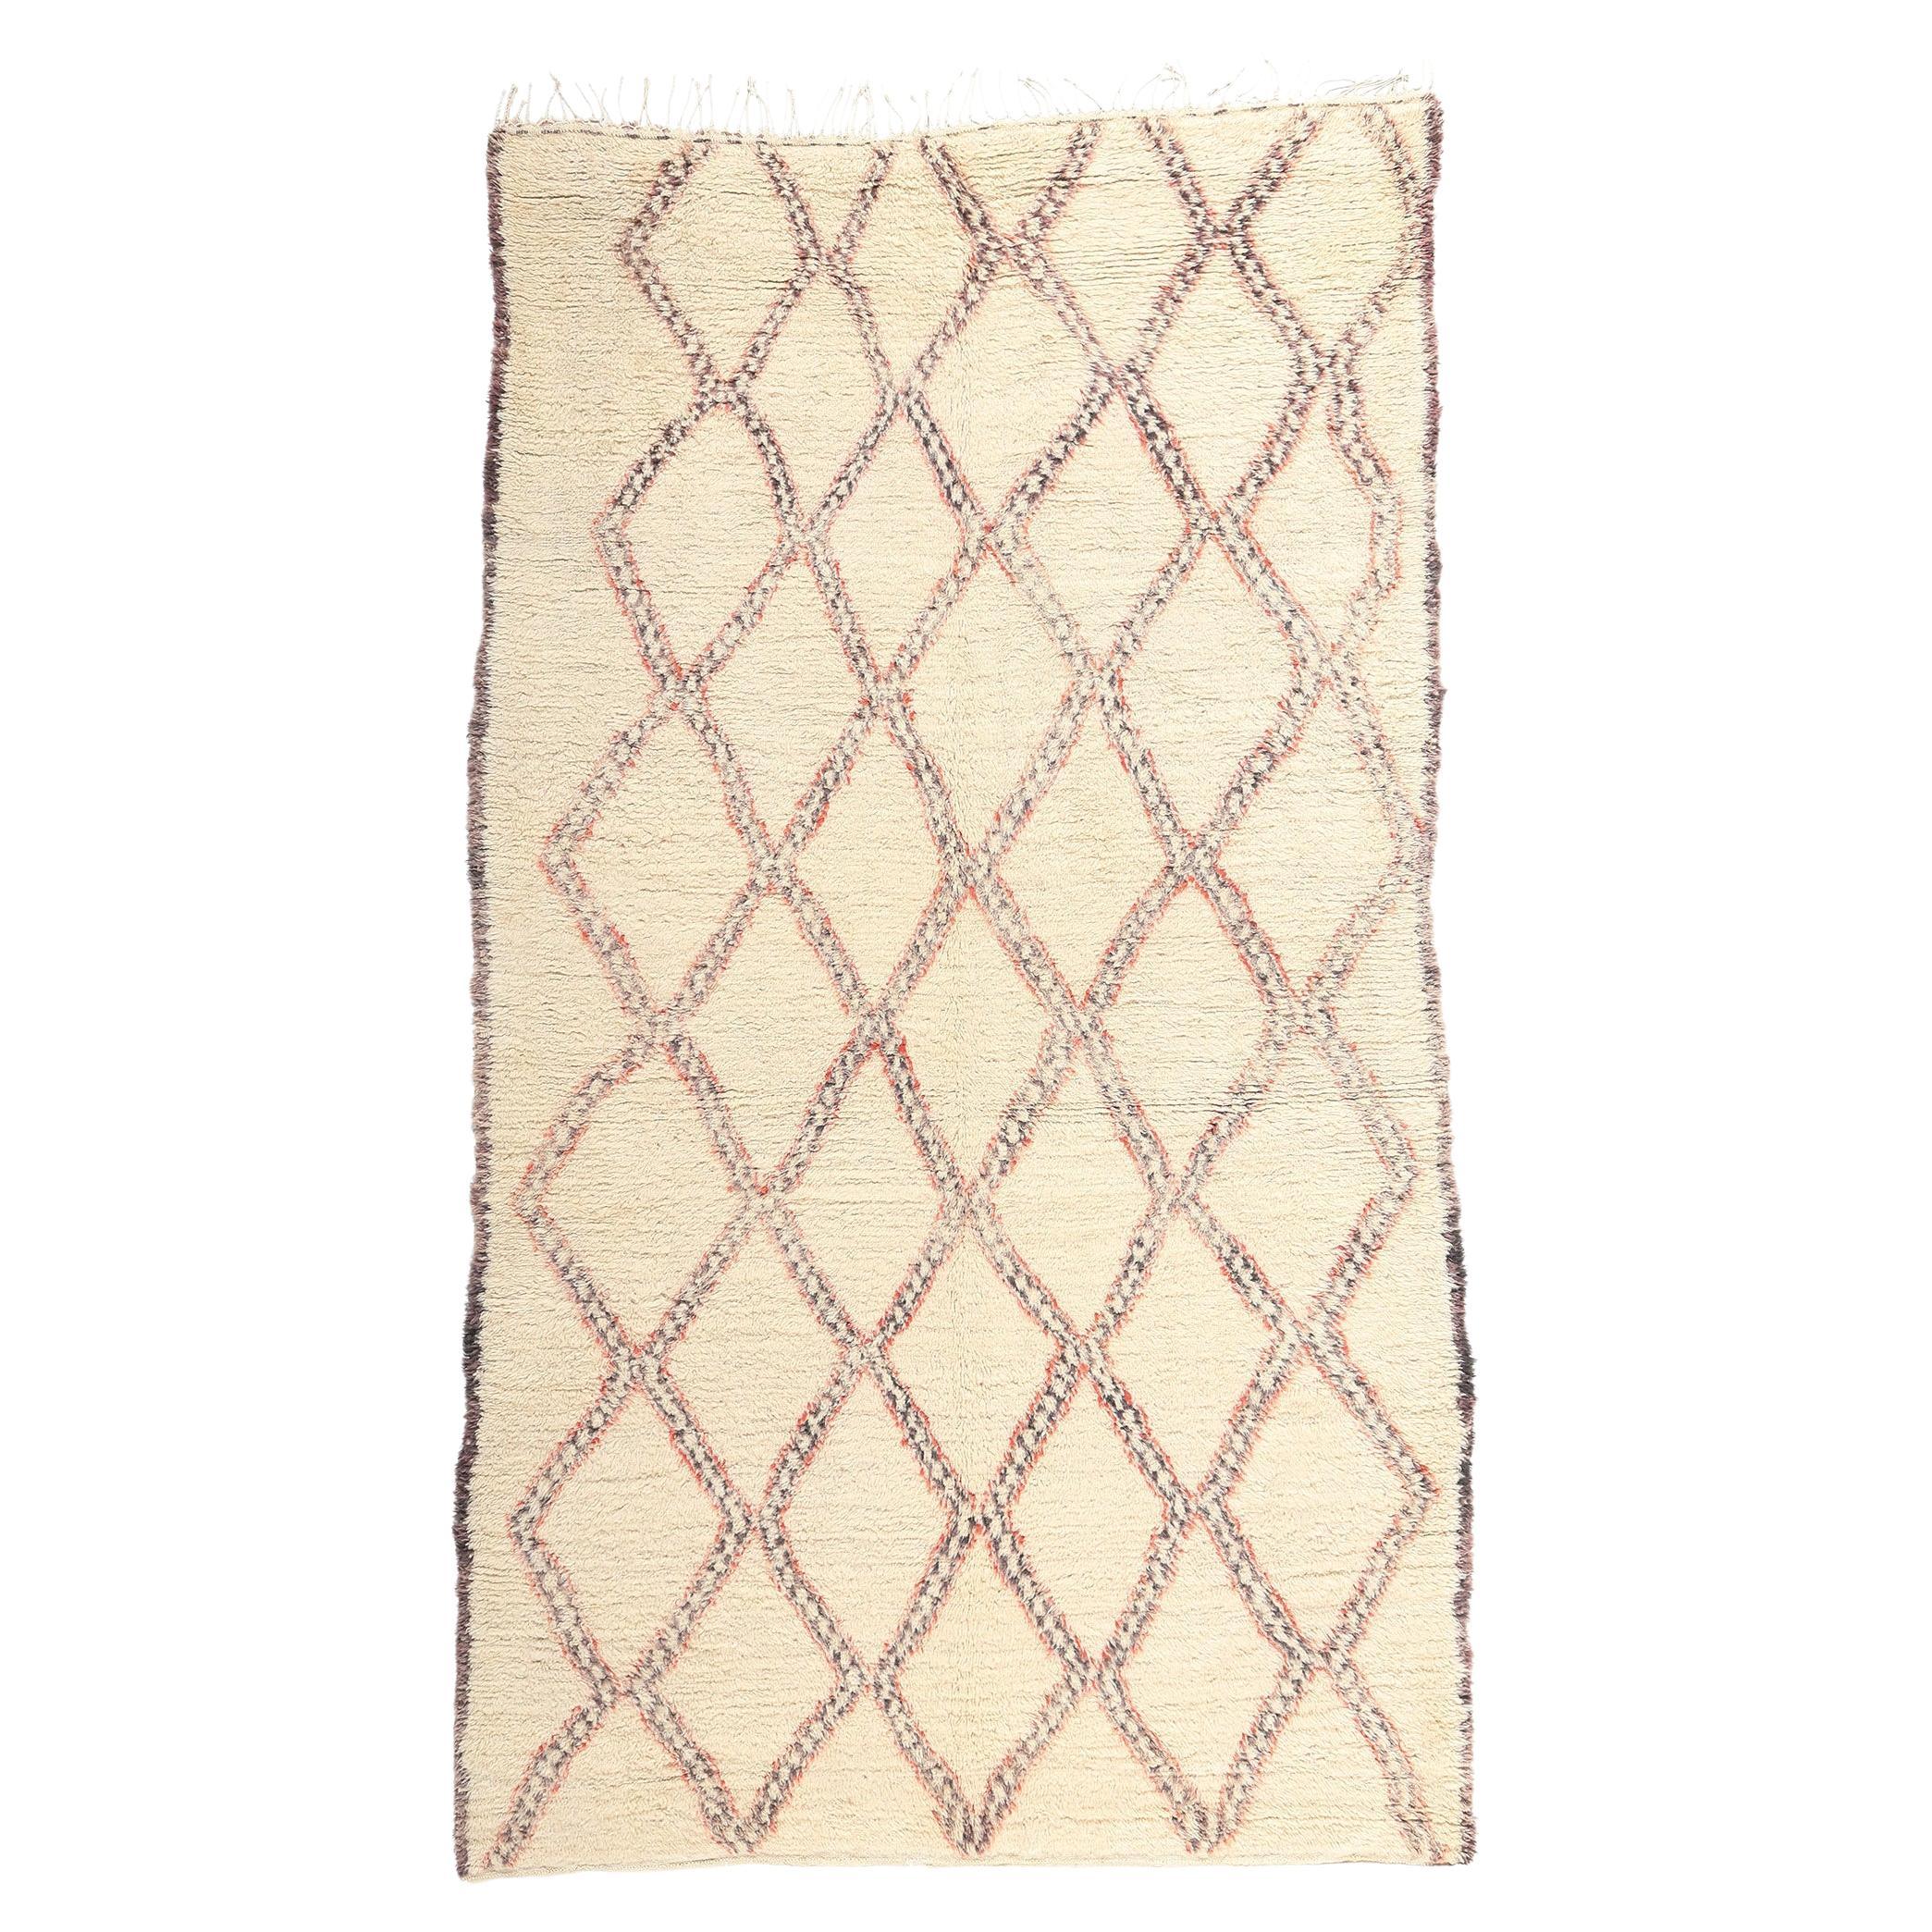 Vintage Beni Ourain Moroccan Rug, Mid-Century Modern Style Meets Tribal Allure